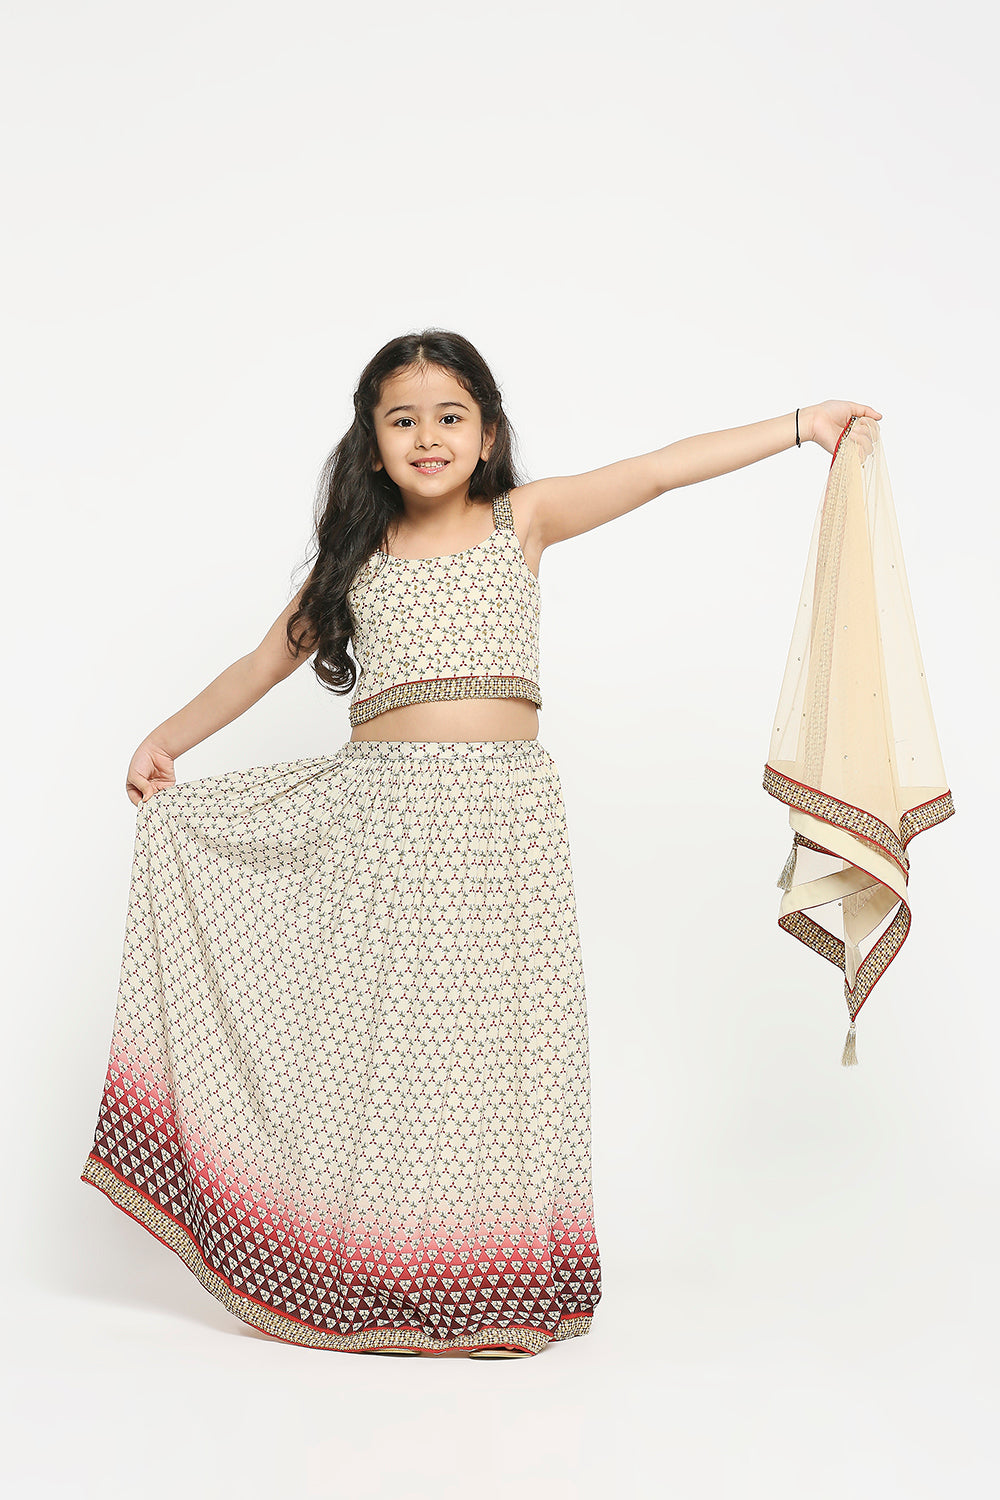 Applique Geometric Printed Lehenga Paired With Crop Top And Net Dupatta